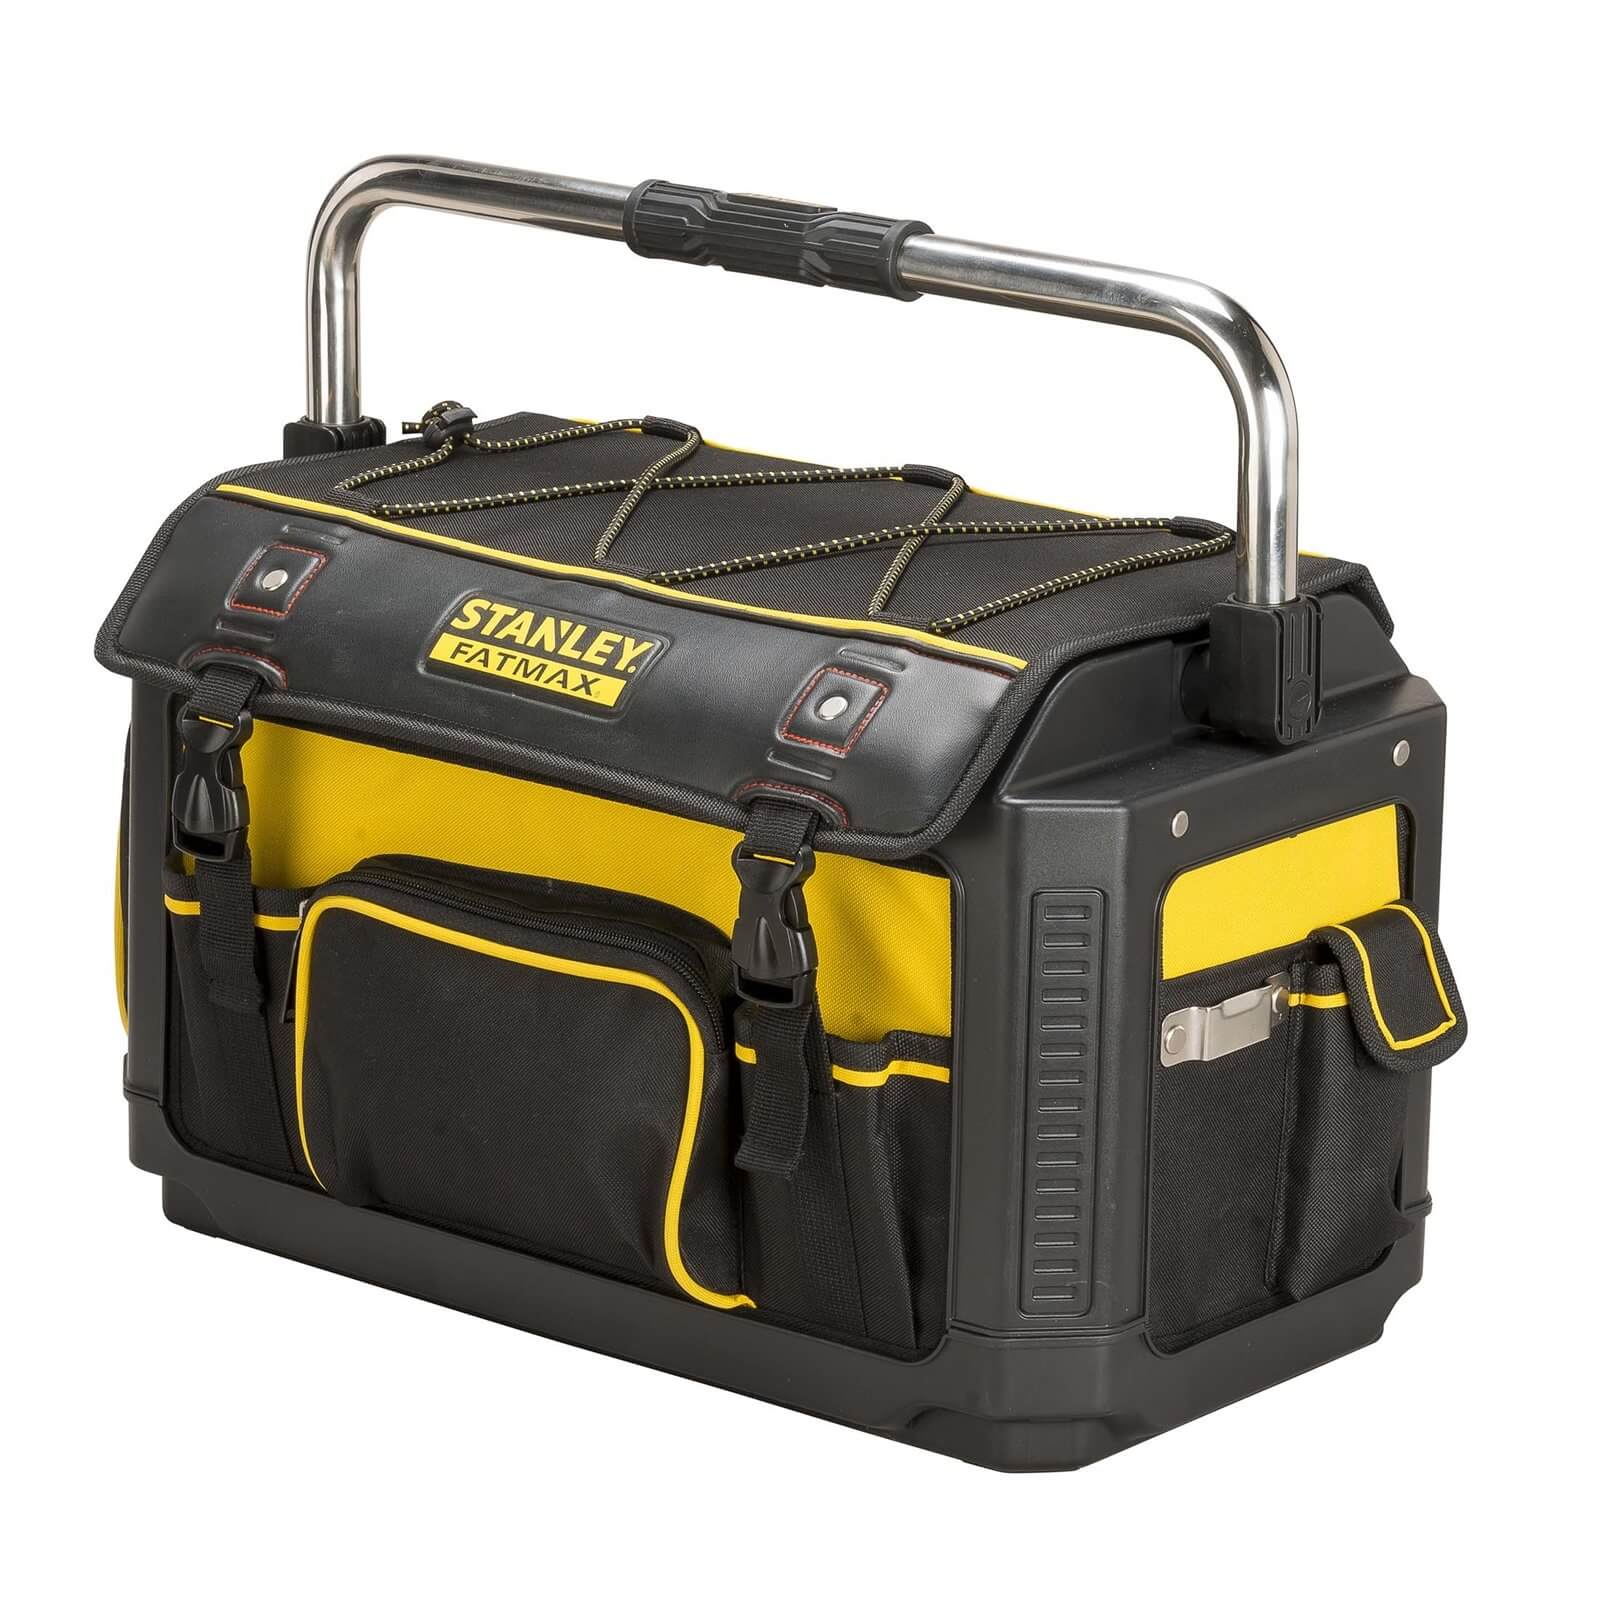 20INCH STANLEY FAT MAX HYBRID TOTE